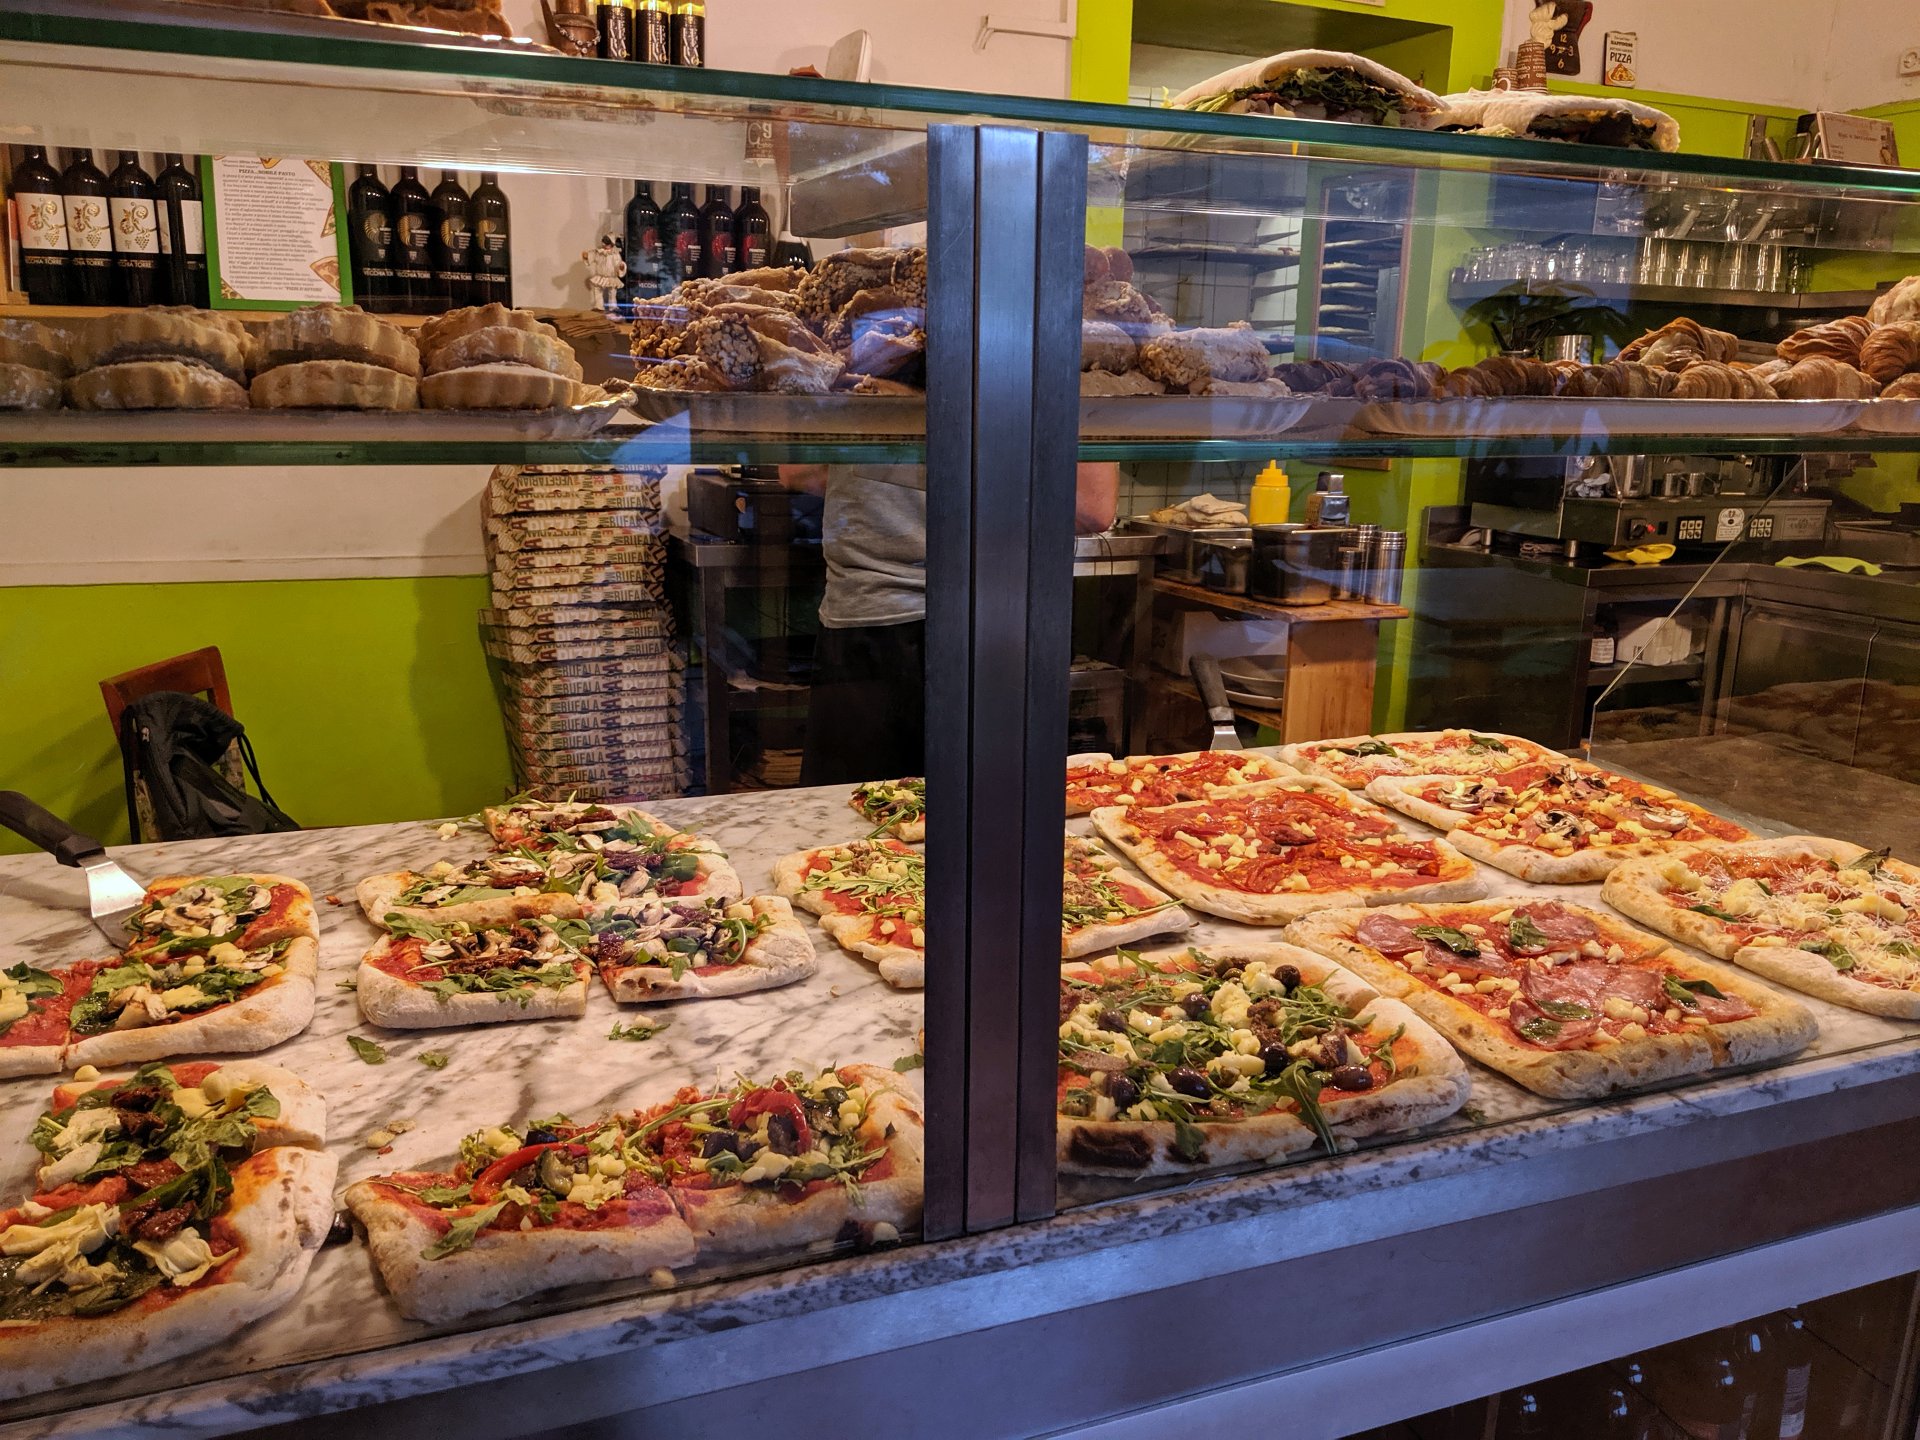 Another shot of the counter and pizza selection